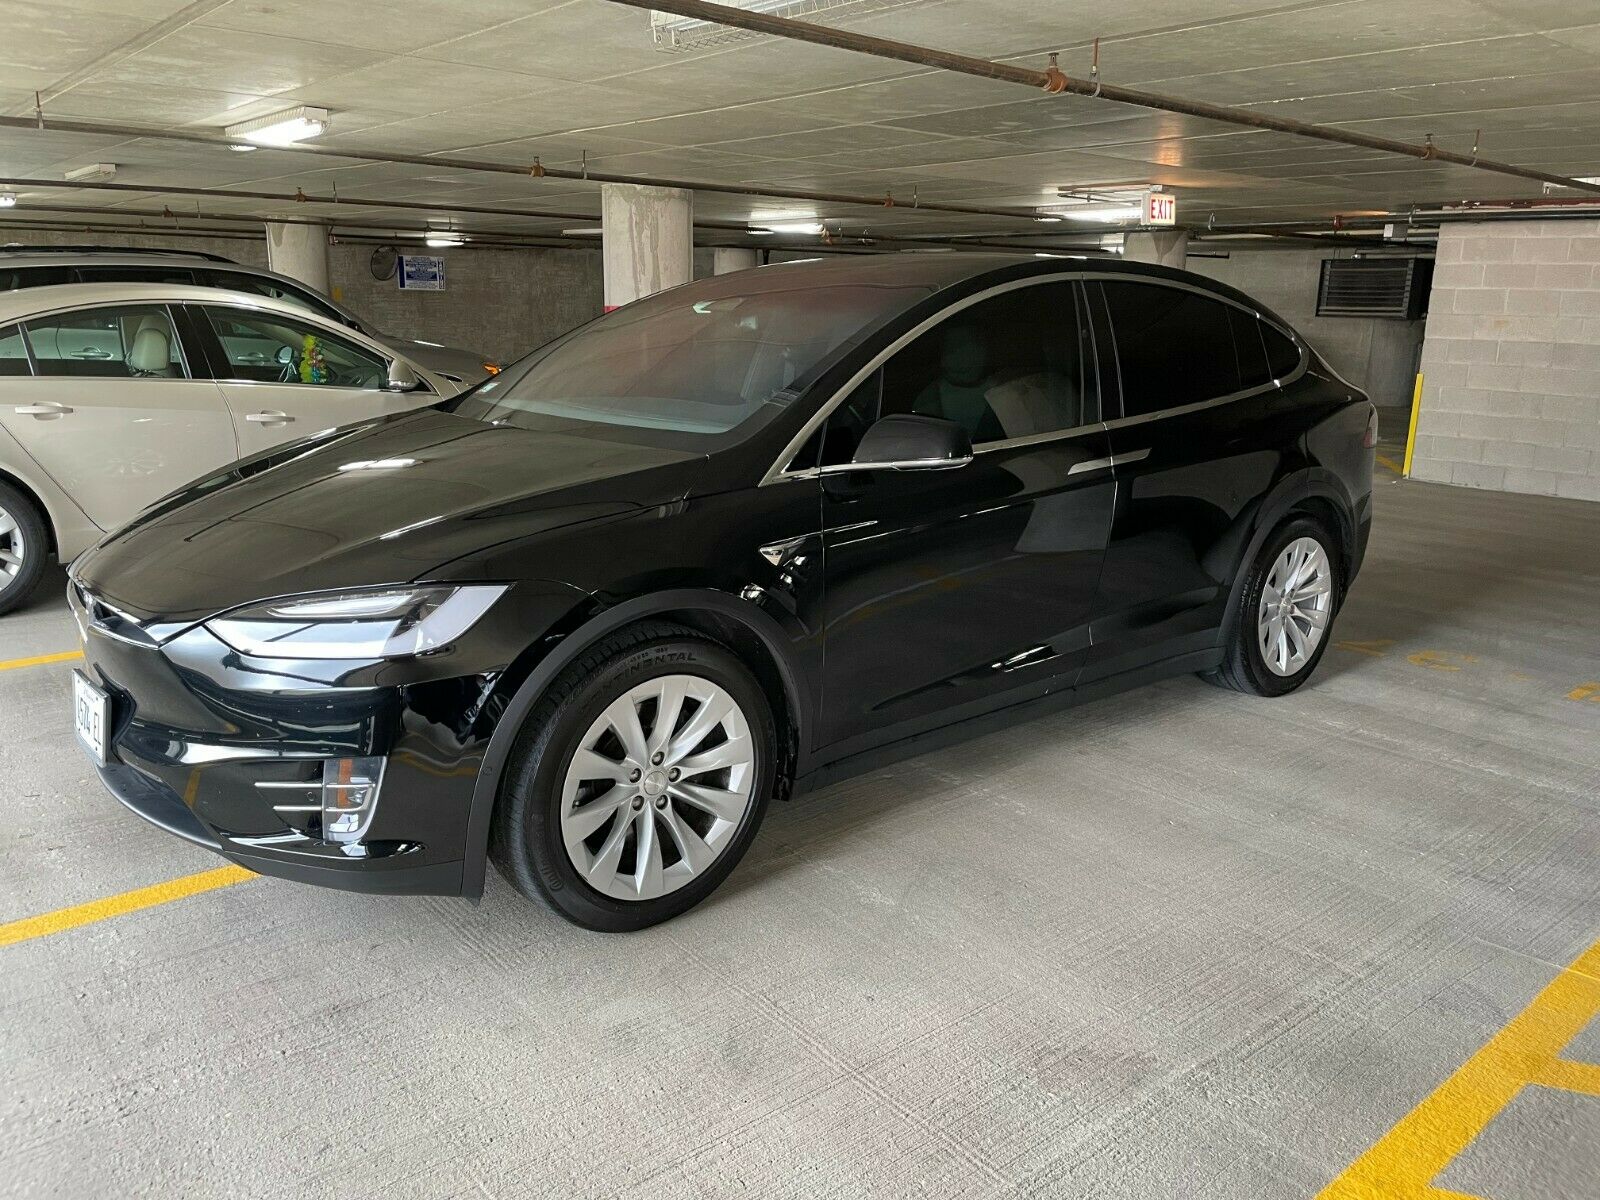 2017 Tesla Model X 100d Excellent Condition. Private Owner. Low Miles 21k! Premium Upgrades Package